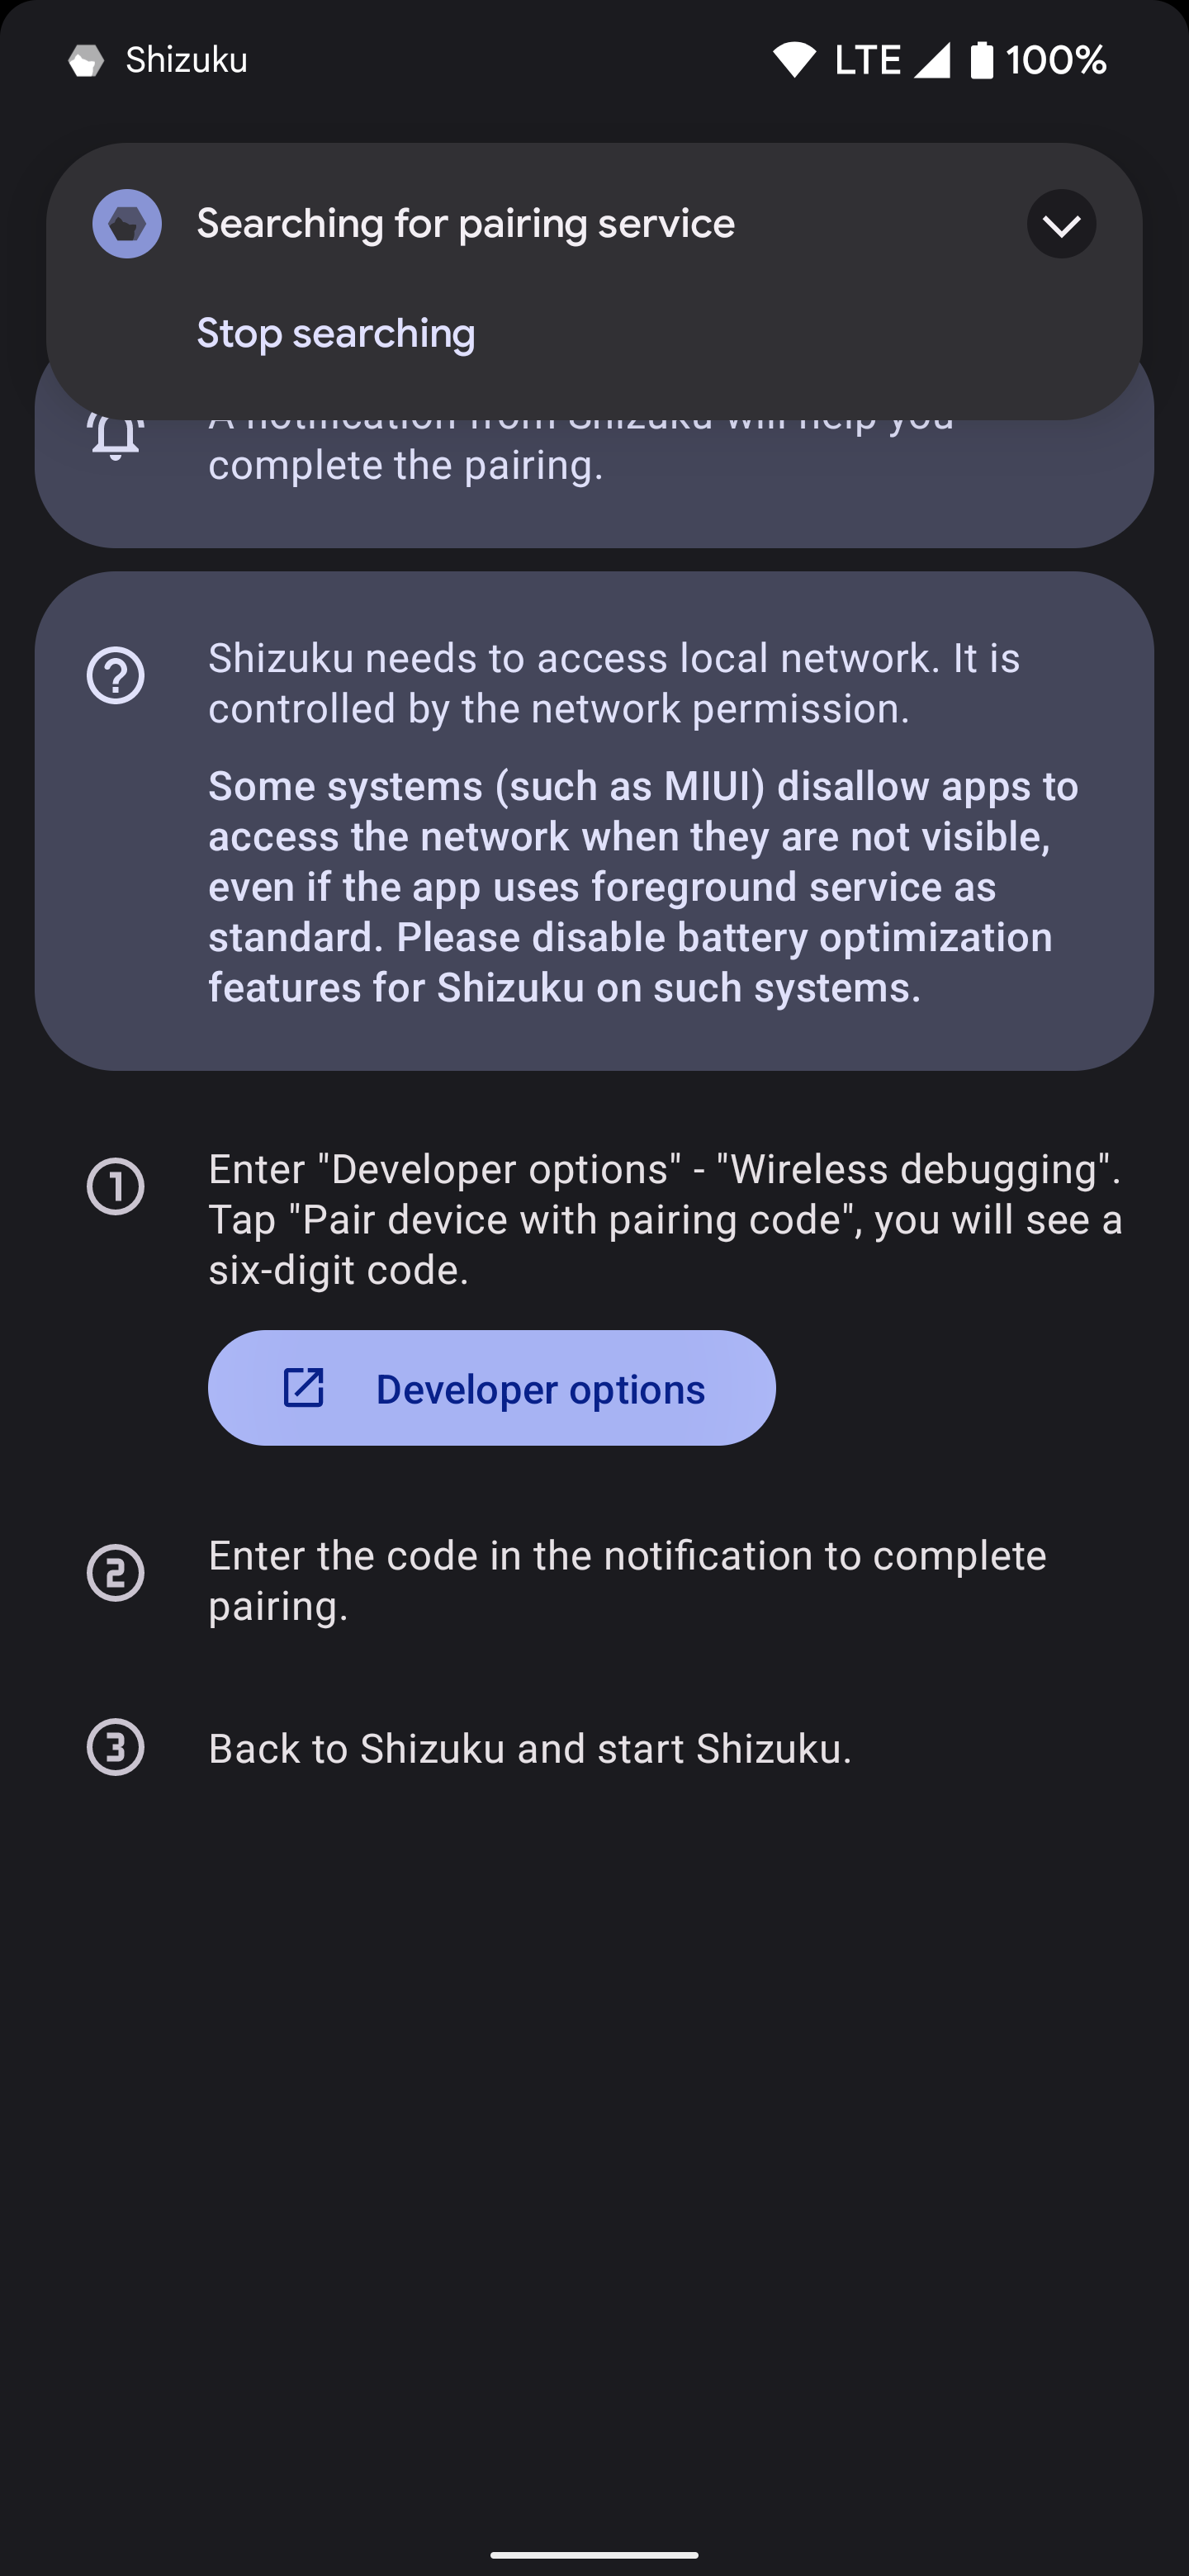 Tapping the Developer options button in the Shizuku app.